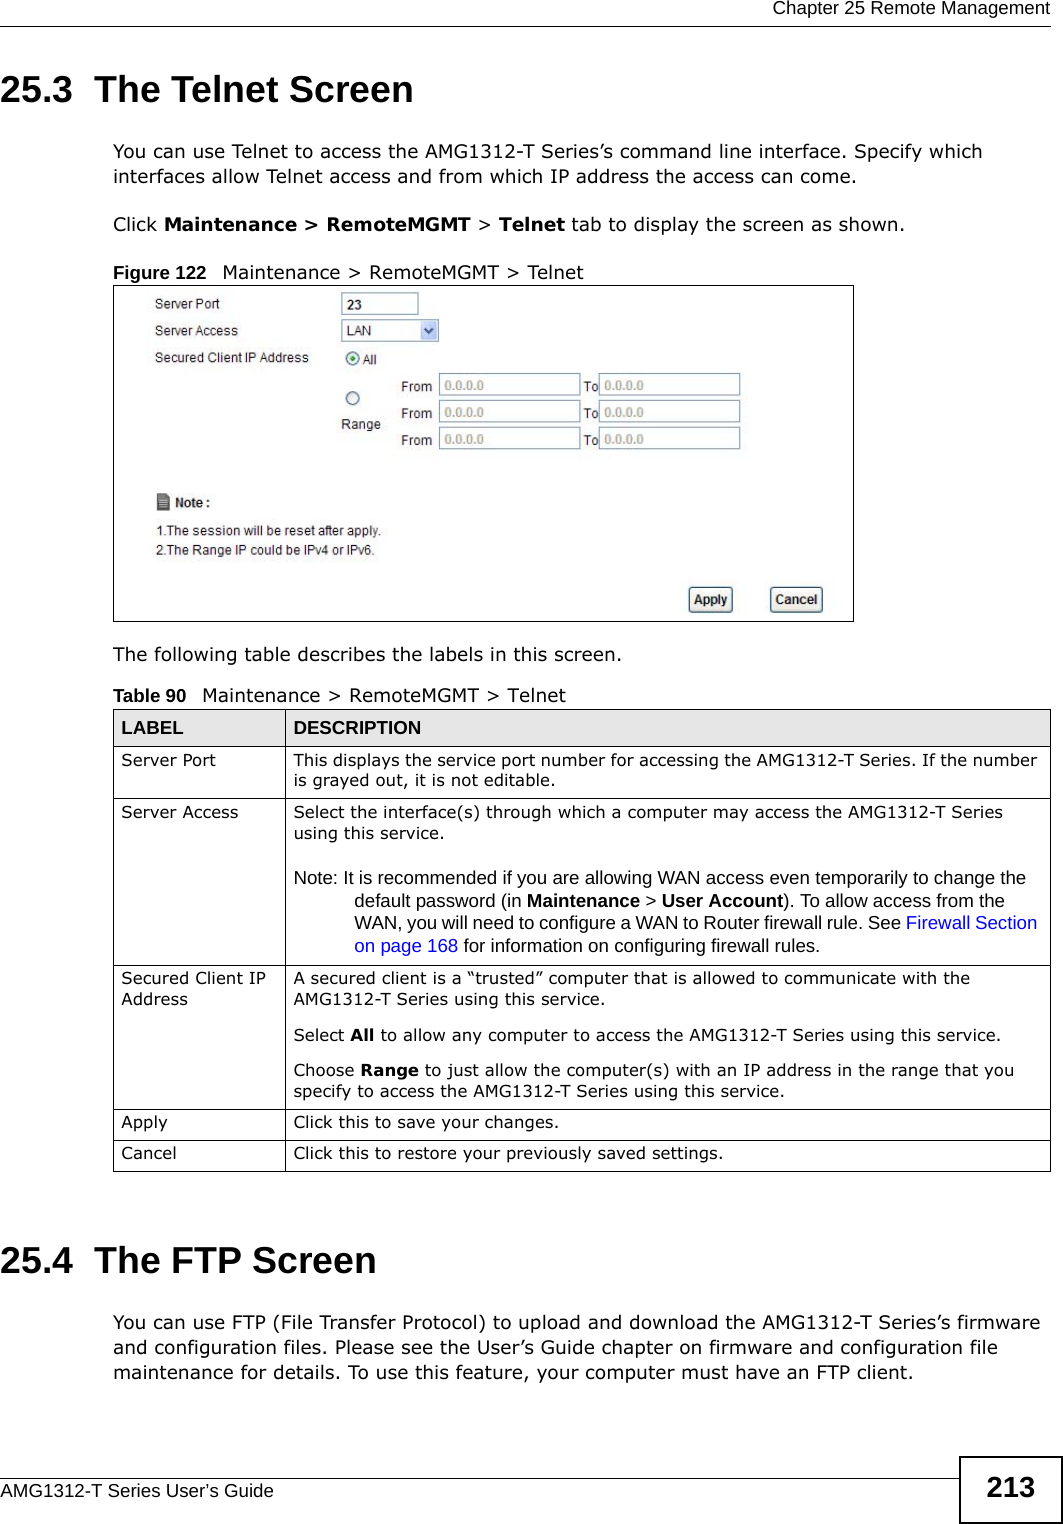  Chapter 25 Remote ManagementAMG1312-T Series User’s Guide 21325.3  The Telnet ScreenYou can use Telnet to access the AMG1312-T Series’s command line interface. Specify which interfaces allow Telnet access and from which IP address the access can come.Click Maintenance &gt; RemoteMGMT &gt; Telnet tab to display the screen as shown. Figure 122   Maintenance &gt; RemoteMGMT &gt; TelnetThe following table describes the labels in this screen.25.4  The FTP Screen You can use FTP (File Transfer Protocol) to upload and download the AMG1312-T Series’s firmware and configuration files. Please see the User’s Guide chapter on firmware and configuration file maintenance for details. To use this feature, your computer must have an FTP client.Table 90   Maintenance &gt; RemoteMGMT &gt; TelnetLABEL DESCRIPTIONServer Port This displays the service port number for accessing the AMG1312-T Series. If the number is grayed out, it is not editable.Server Access Select the interface(s) through which a computer may access the AMG1312-T Series using this service.Note: It is recommended if you are allowing WAN access even temporarily to change the default password (in Maintenance &gt; User Account). To allow access from the WAN, you will need to configure a WAN to Router firewall rule. See Firewall Section on page 168 for information on configuring firewall rules.Secured Client IP AddressA secured client is a “trusted” computer that is allowed to communicate with the AMG1312-T Series using this service. Select All to allow any computer to access the AMG1312-T Series using this service.Choose Range to just allow the computer(s) with an IP address in the range that you specify to access the AMG1312-T Series using this service.Apply Click this to save your changes.Cancel Click this to restore your previously saved settings.